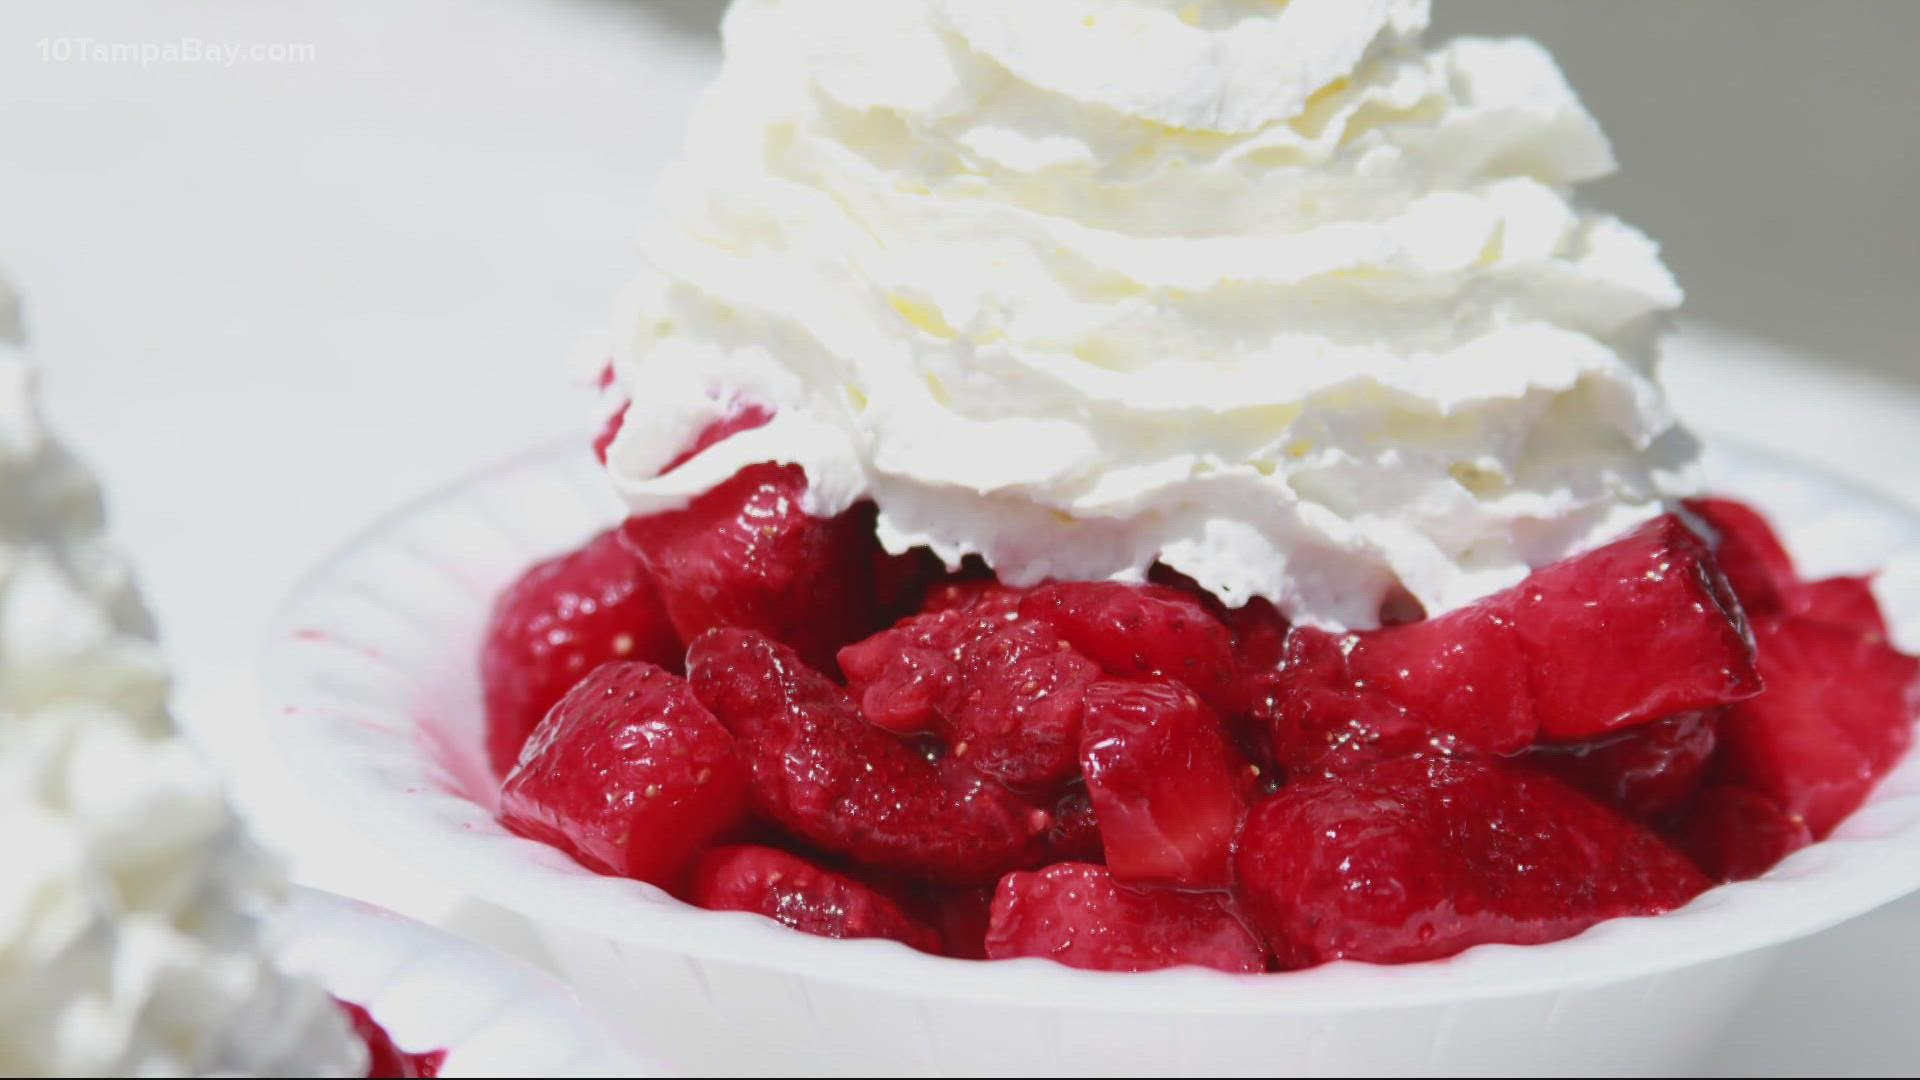 A bill in the Florida House that would declare strawberry shortcake the state's official dessert is up for debate.